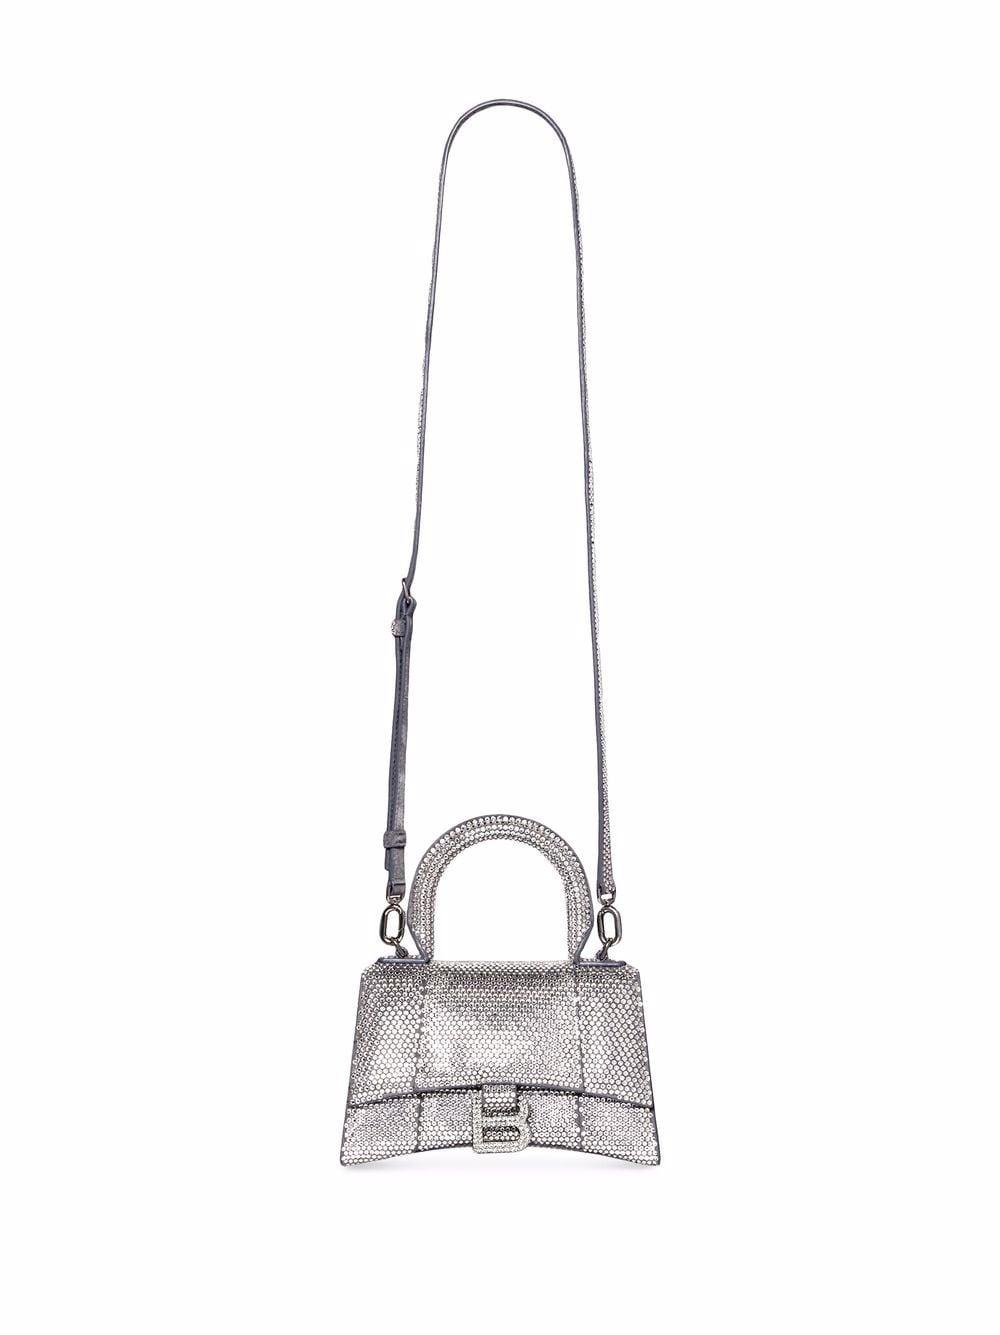 Balenciaga Crystal-embellished Hourglass Tote Bag in Gray | Lyst